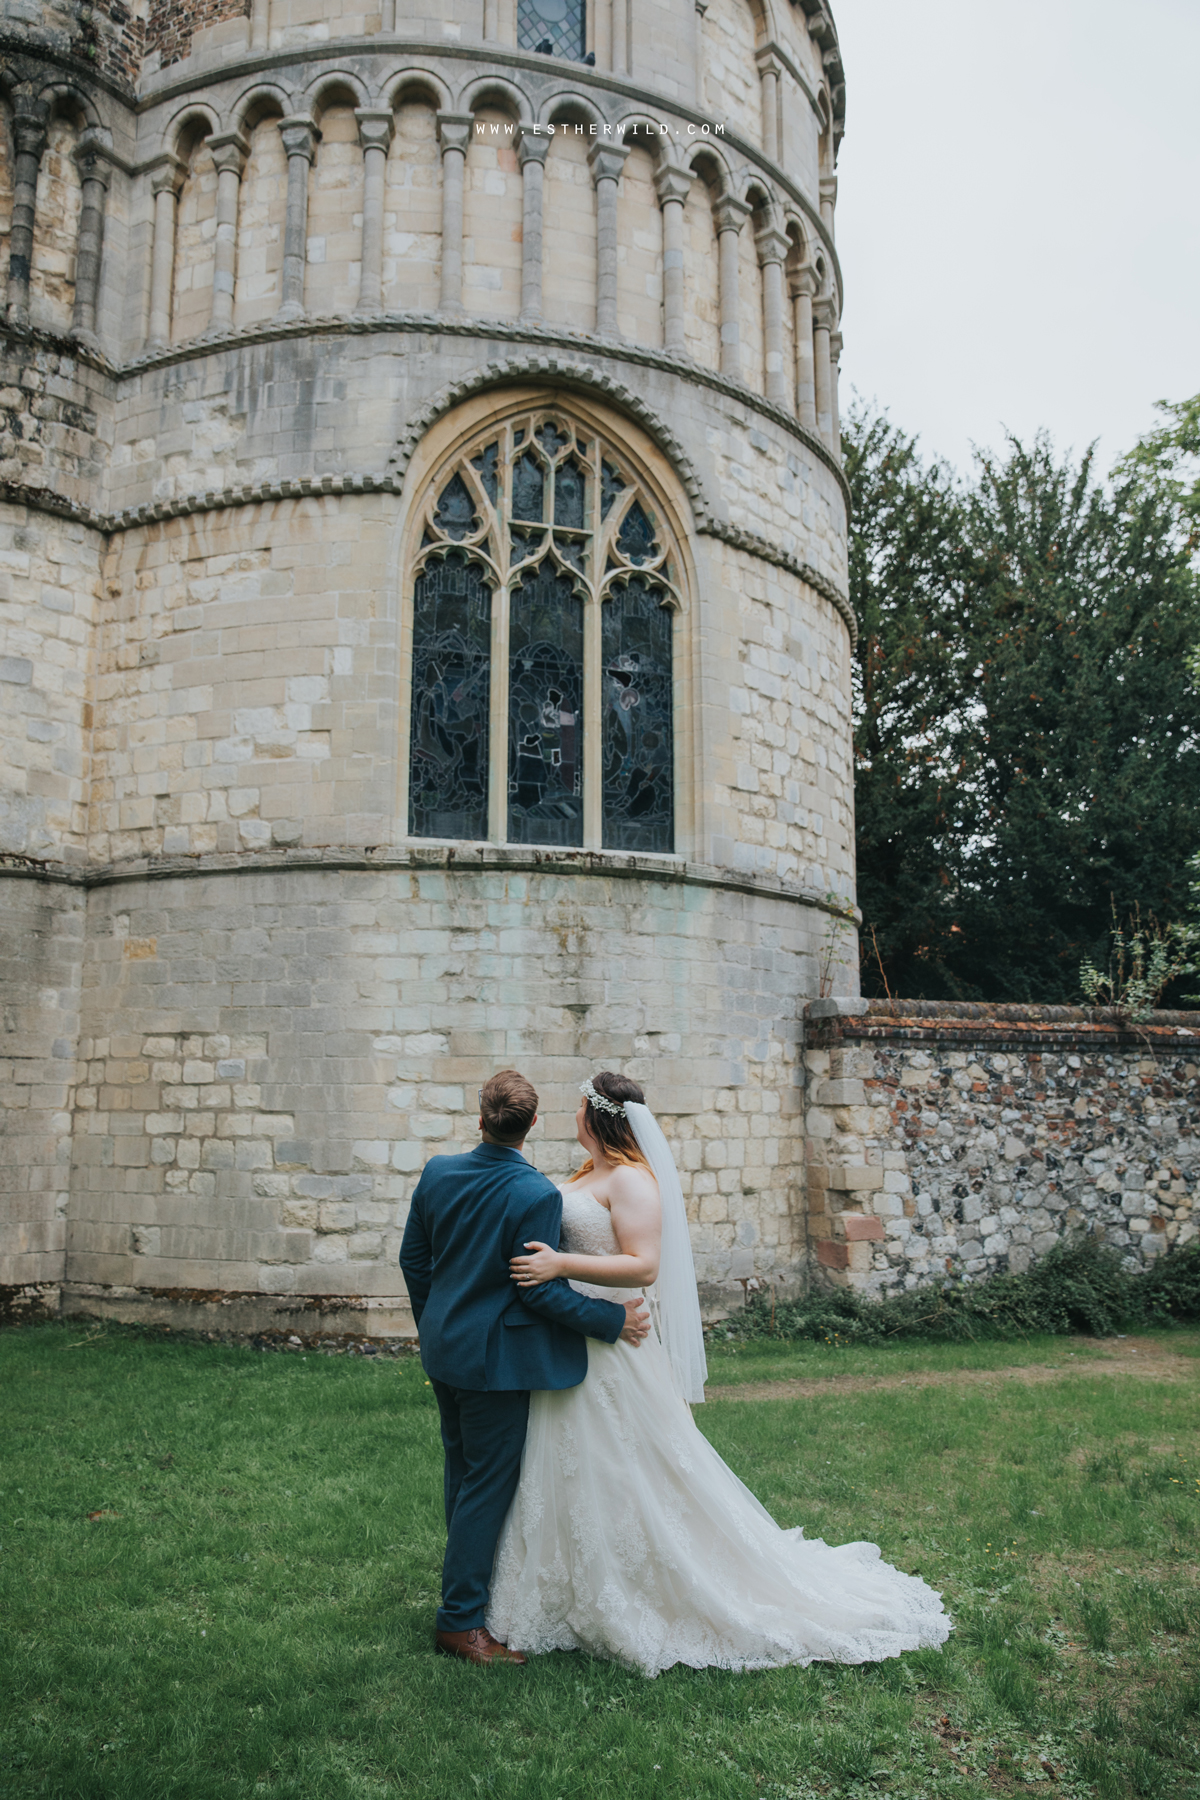 Norwich_Castle_Arcade_Grosvenor_Chip_Birdcage_Cathedral_Cloisters_Refectory_Wedding_Photography_Esther_Wild_Photographer_Norfolk_Kings_Lynn_3R8A1906.jpg